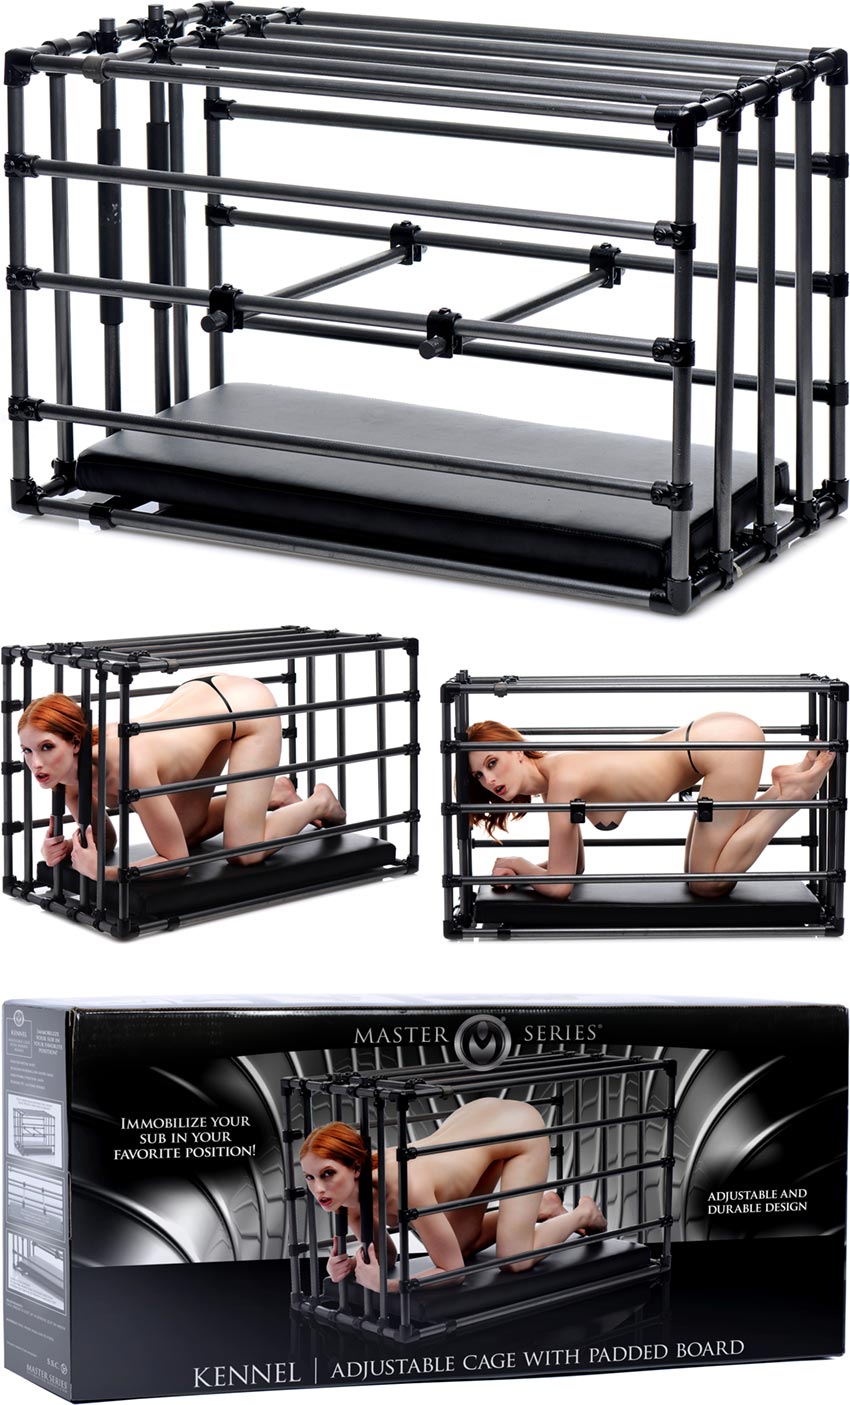 Master Series Kennel BDSM cage in steel with padded support